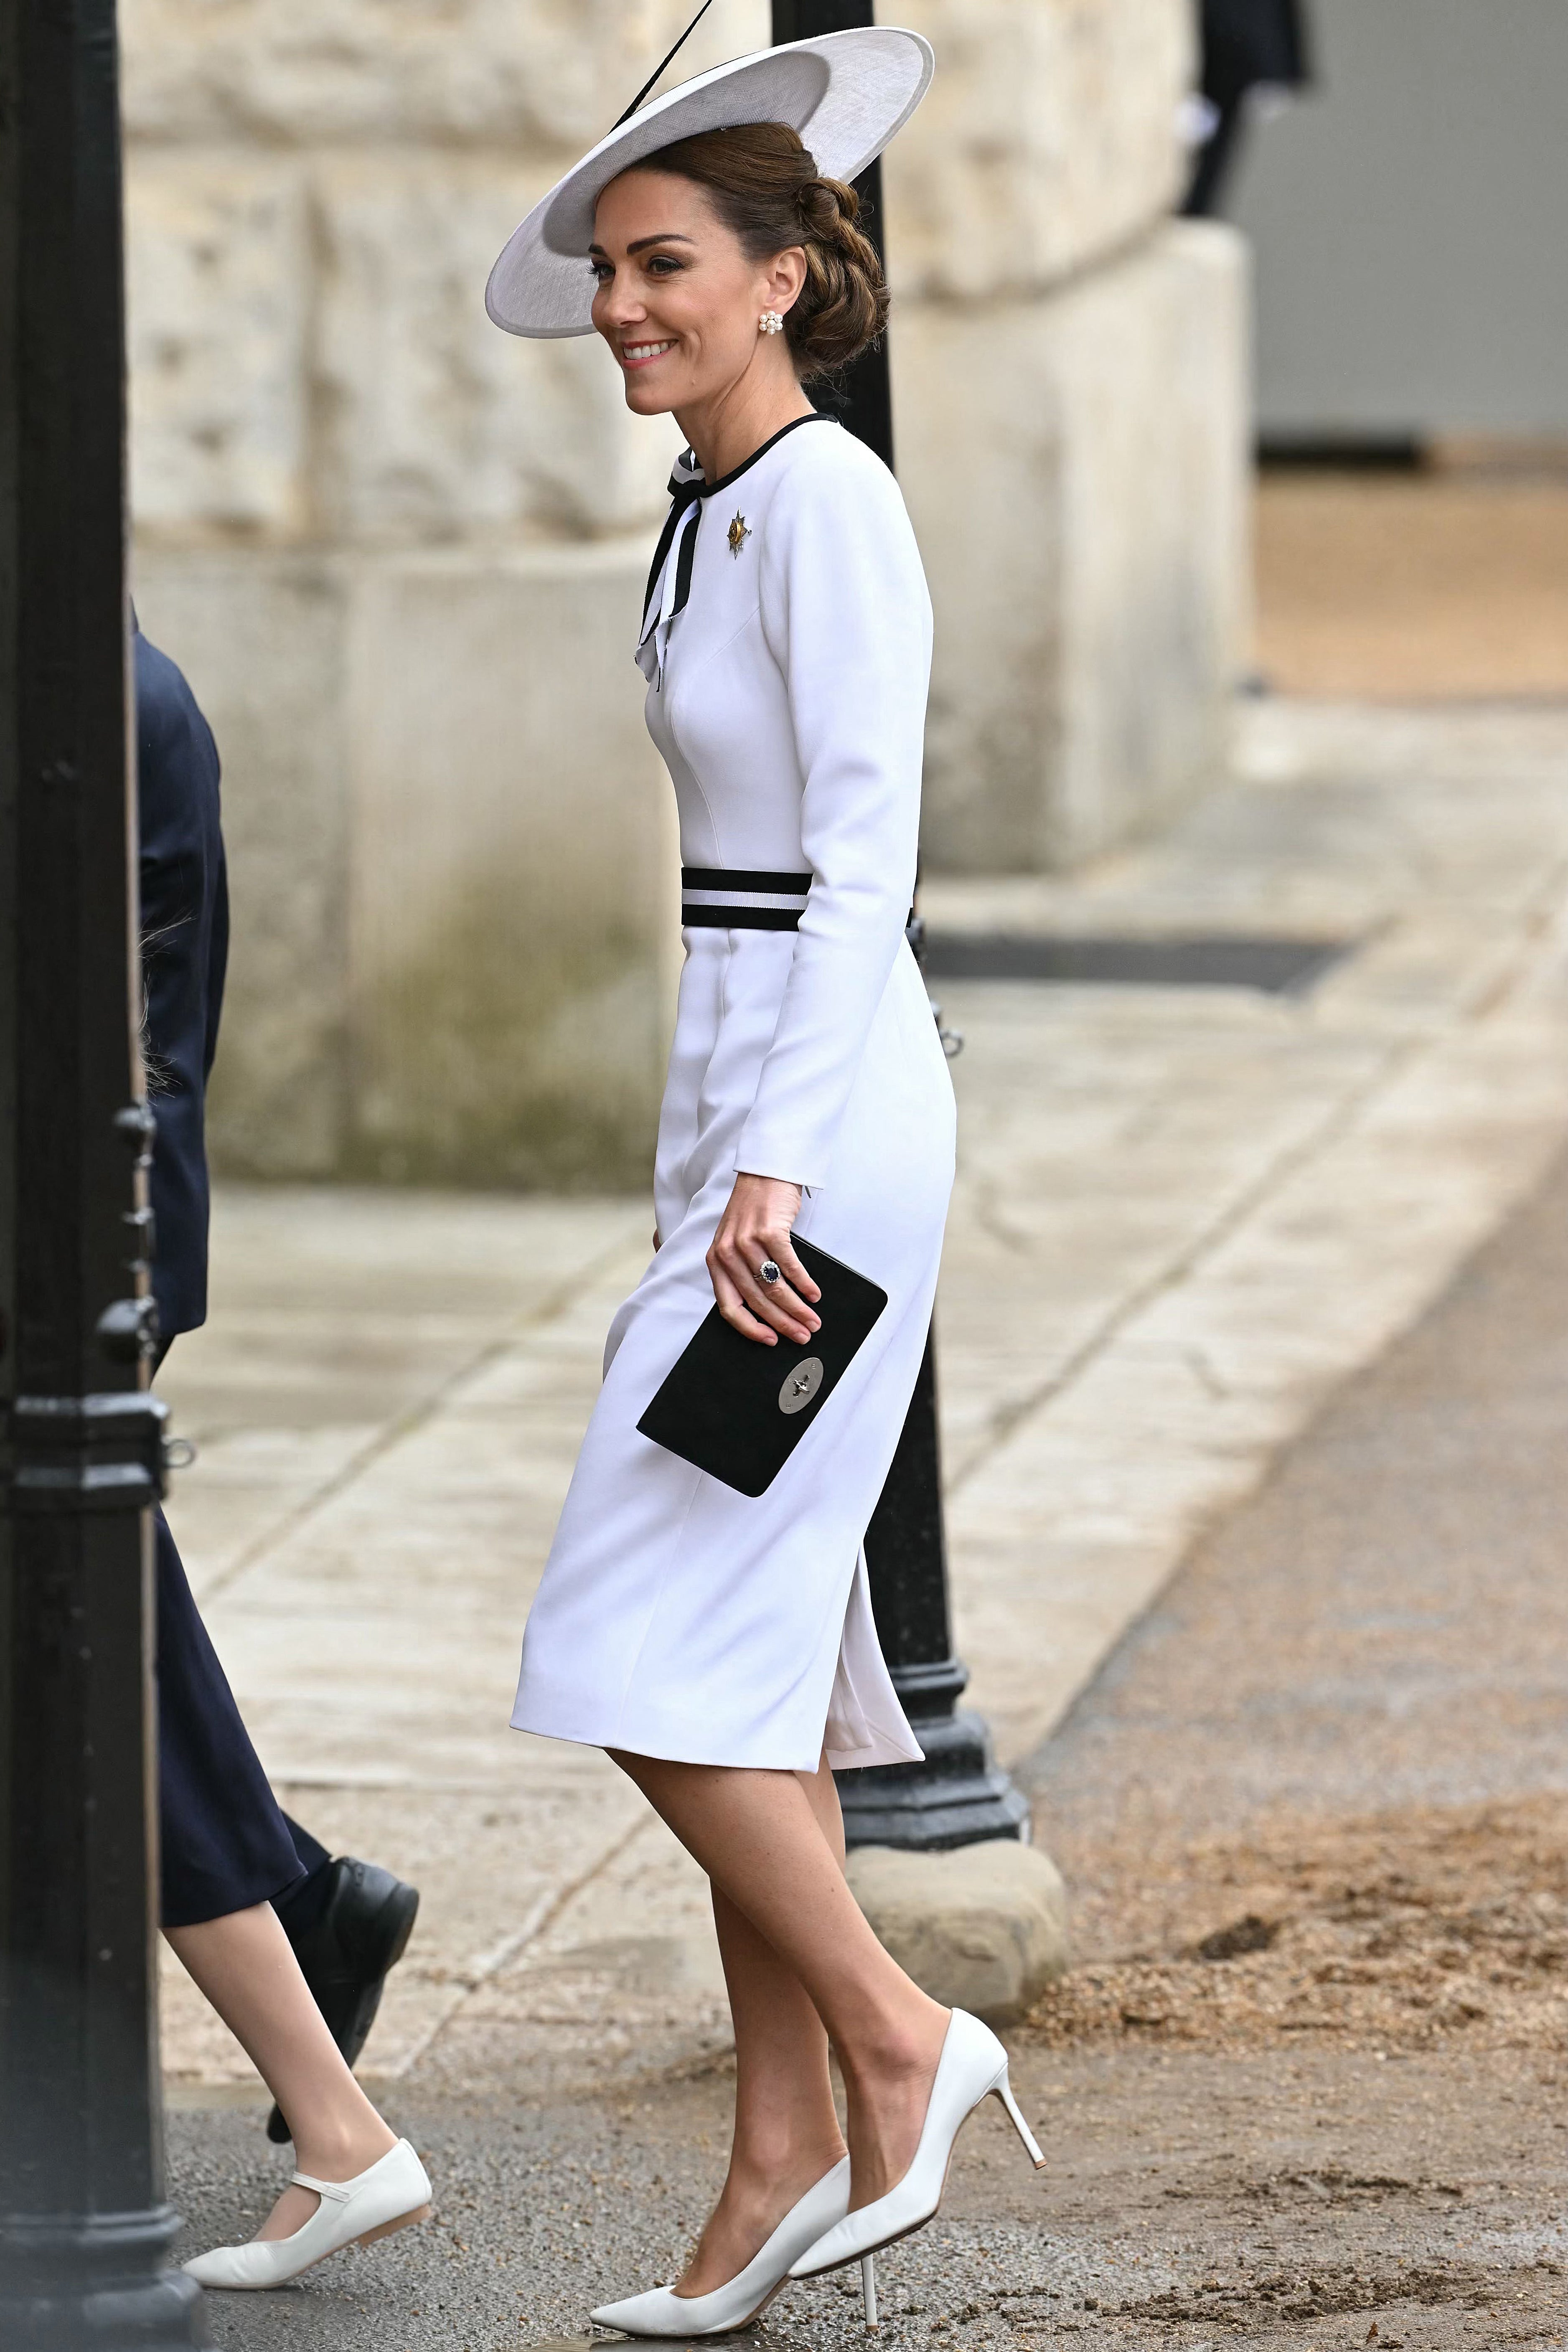 Princess of Wales arrives to Horse Guards Parades in a bold return to public life for the first time since being diagnosed with cancer